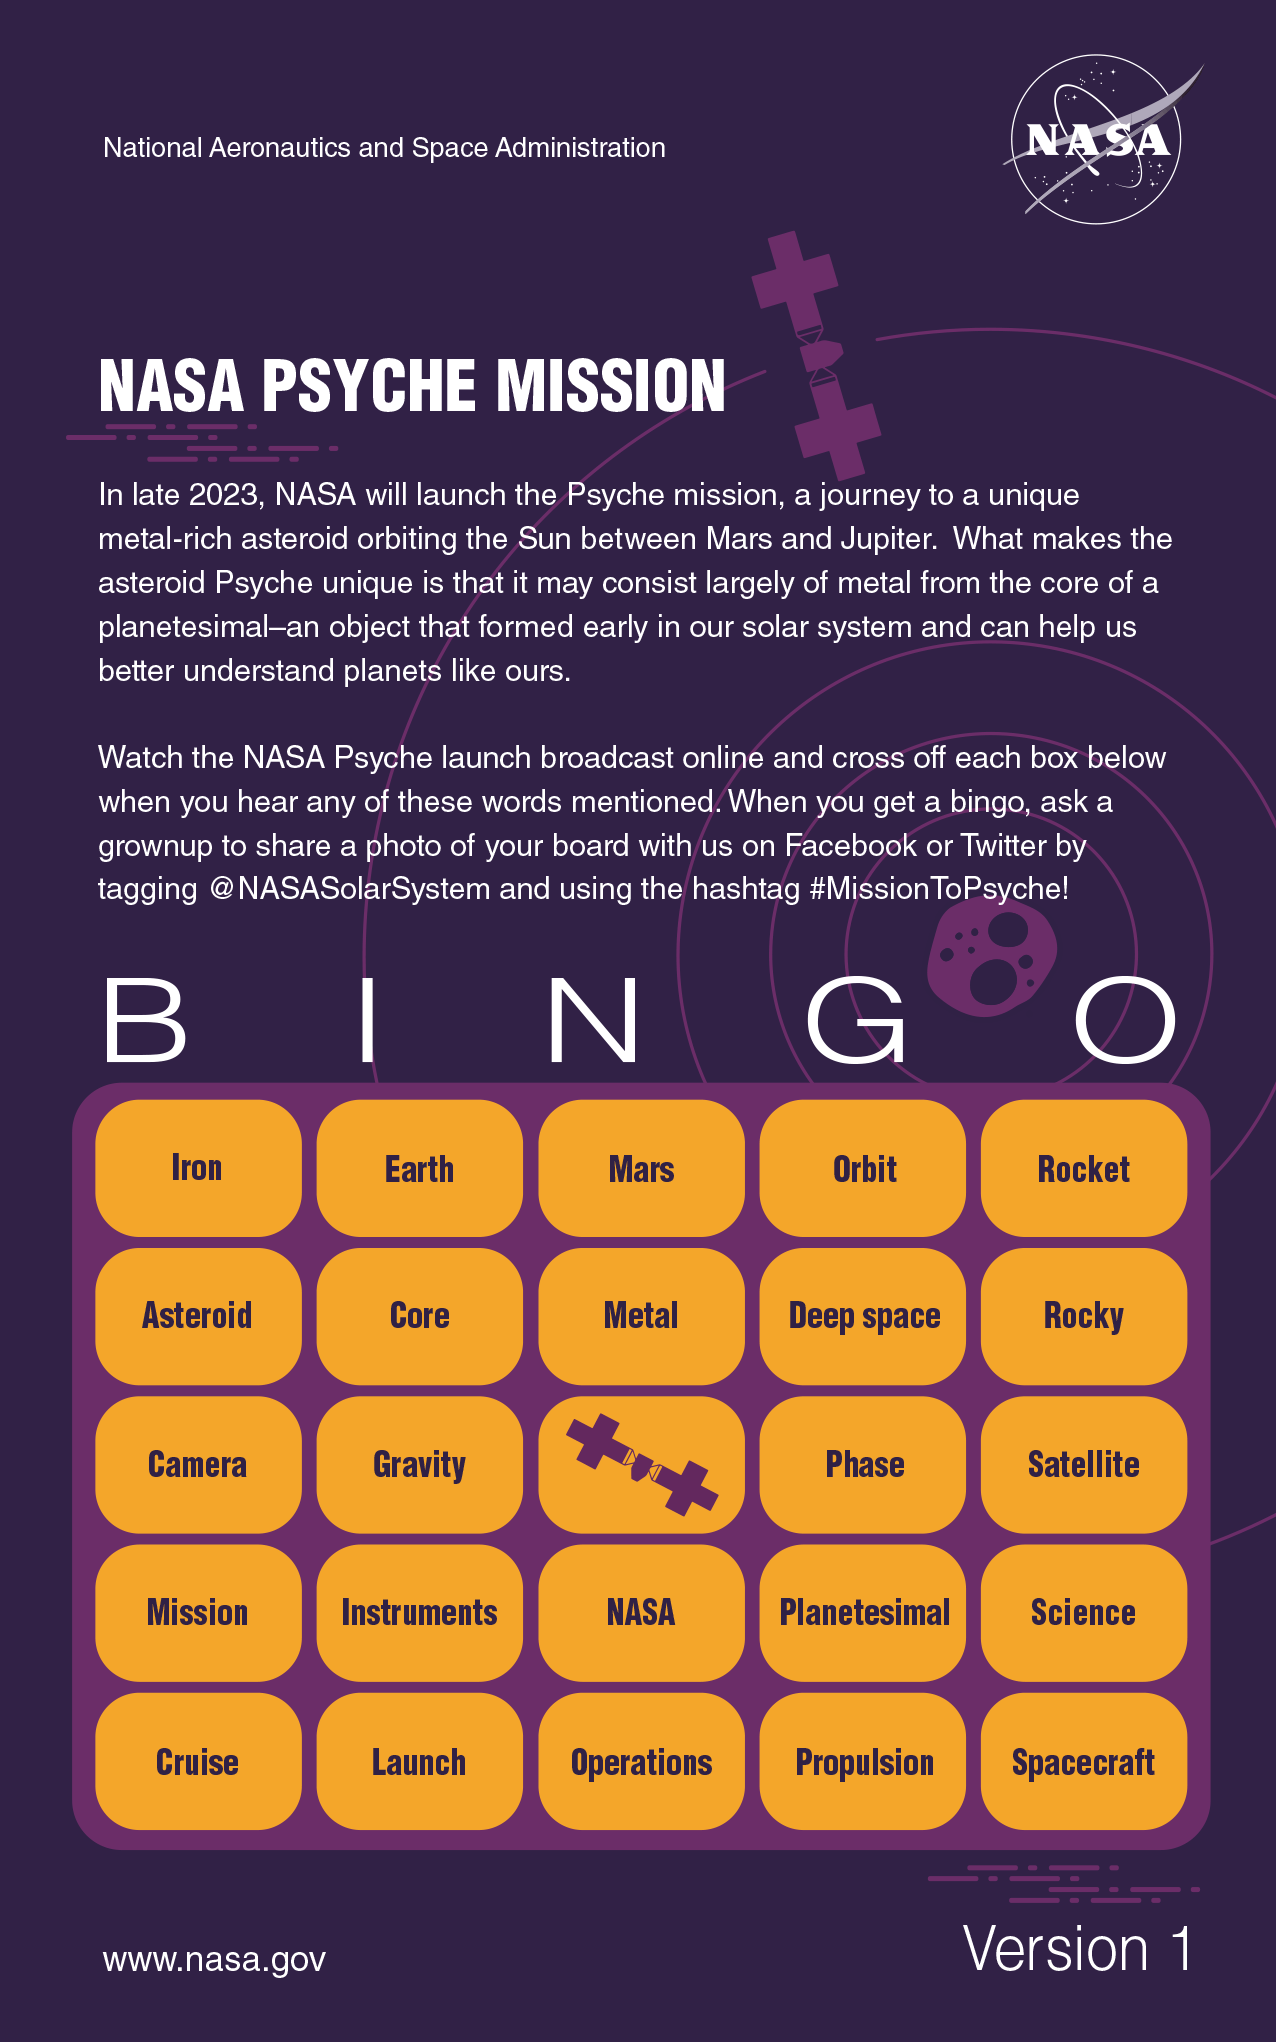 Bingo card with words to cross off during the launch of Psyche. The top of the card reads "NASA PSYCHE MISSION. In late 2023, NASA will launch the Psyche mission, a journey to a unique metal-rich asteroid orbiting the Sun between Mars and Jupiter. What makes the asteroid Psyche unique is that it may consist largely of metal from the core of a planetesimal–an object that formed early in our solar system and can help us better understand planets like ours. Watch the NASA Psyche launch broadcast online and cross off each box below when you hear any of these words mentioned. When you get a bingo, ask a grownup to share a photo of your board with us on Facebook or Twitter by tagging @NASASolarSystem and using the hashtag #MissionToPsyche!". The Bingo board is five columns wide by five rows tall. The first row has the words iron, Earth, Mars, orbit and rocket. The second row has the words asteroid, core, metal, deep space and rocky. The third row has the words camera, gravity, free space, phase and satellite. The fourth row has the words mission, instruments, NASA, planetesimal and science. The fifth row has the words cruise, launch, operations, propulsion and spacecraft.